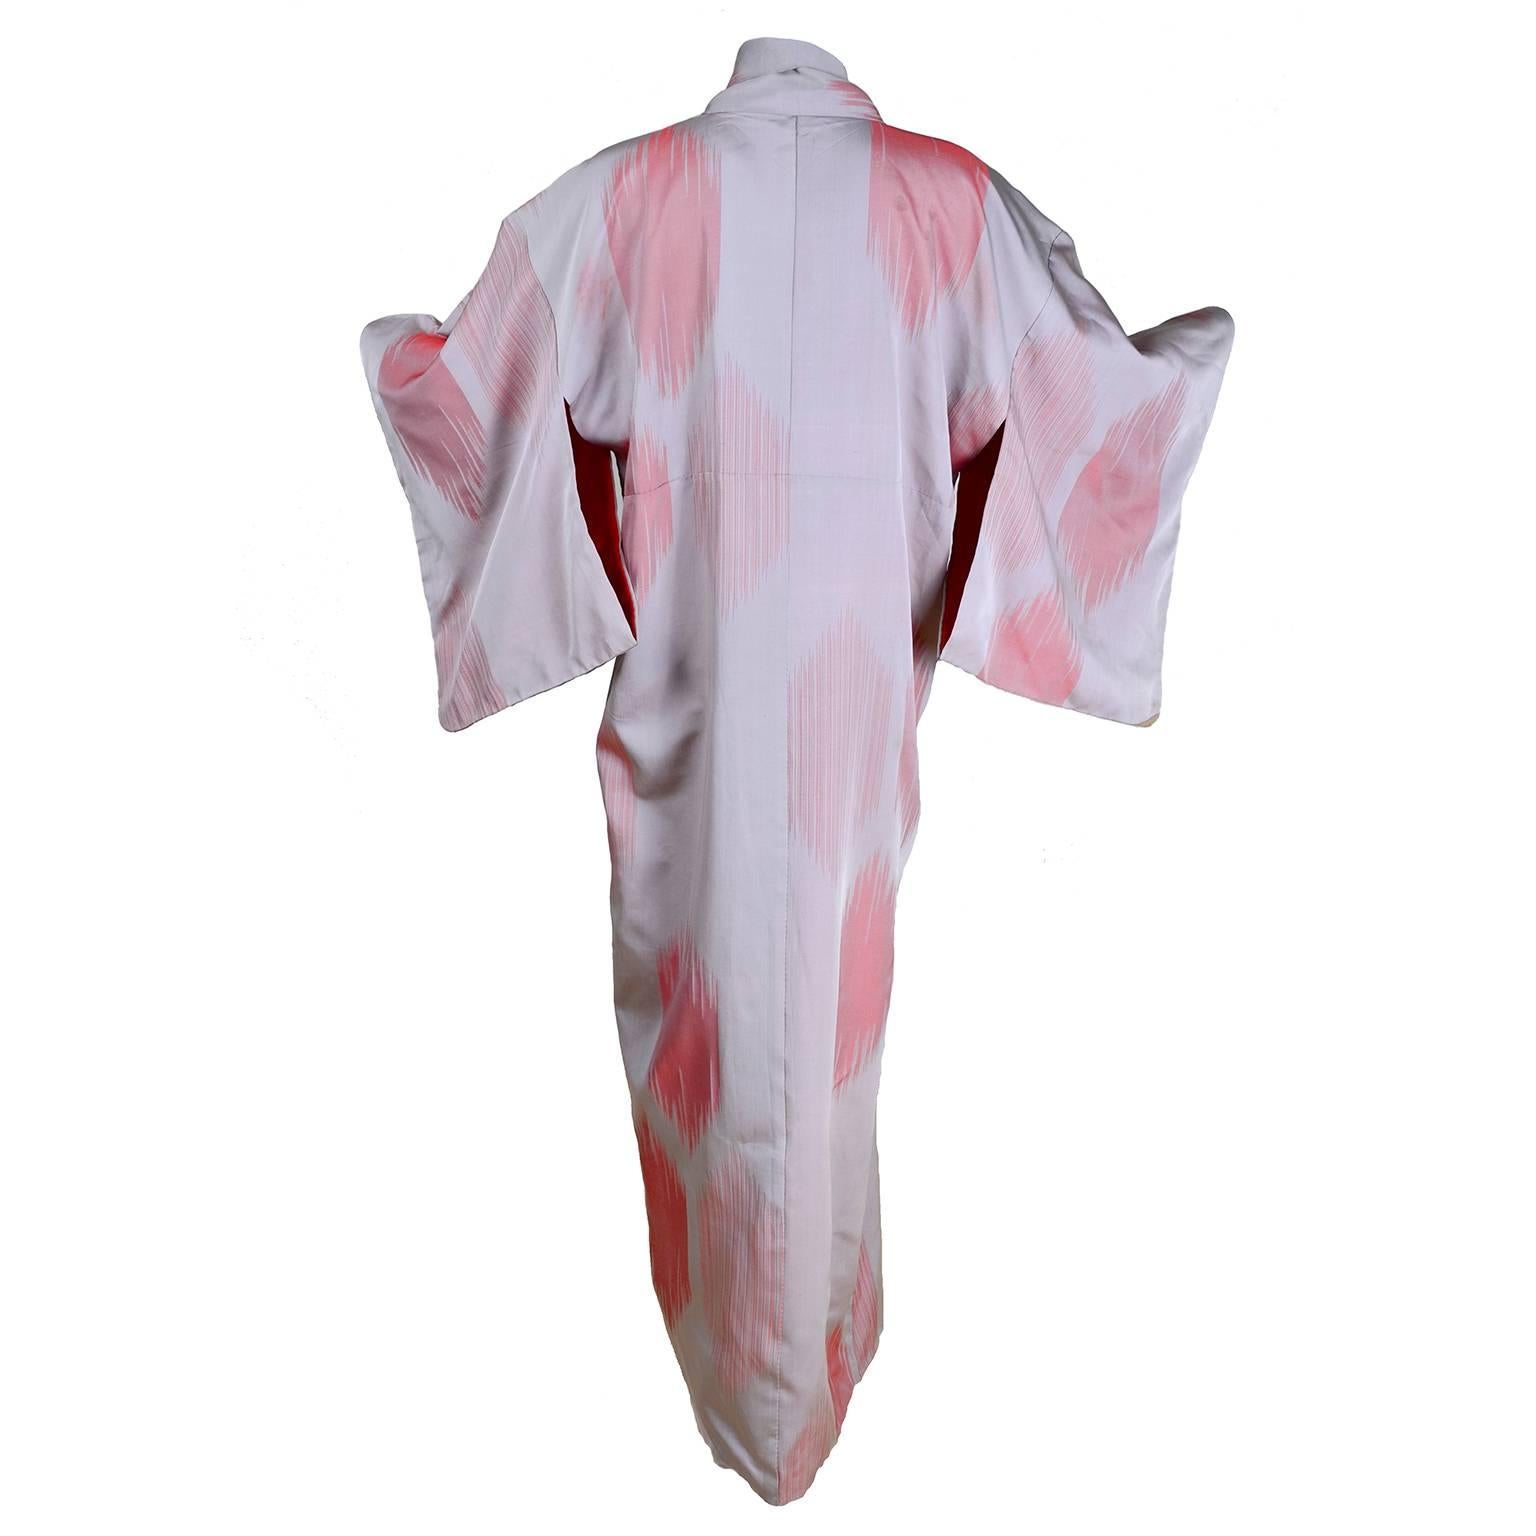 This beautiful vintage Kimono is a pale grayish purple, almost taupe, silk or rayon with salmon abstract designs and is lined in purple silk.  We love kimonos and acquired this from an estate we purchased that had an extensive collection of Japanese